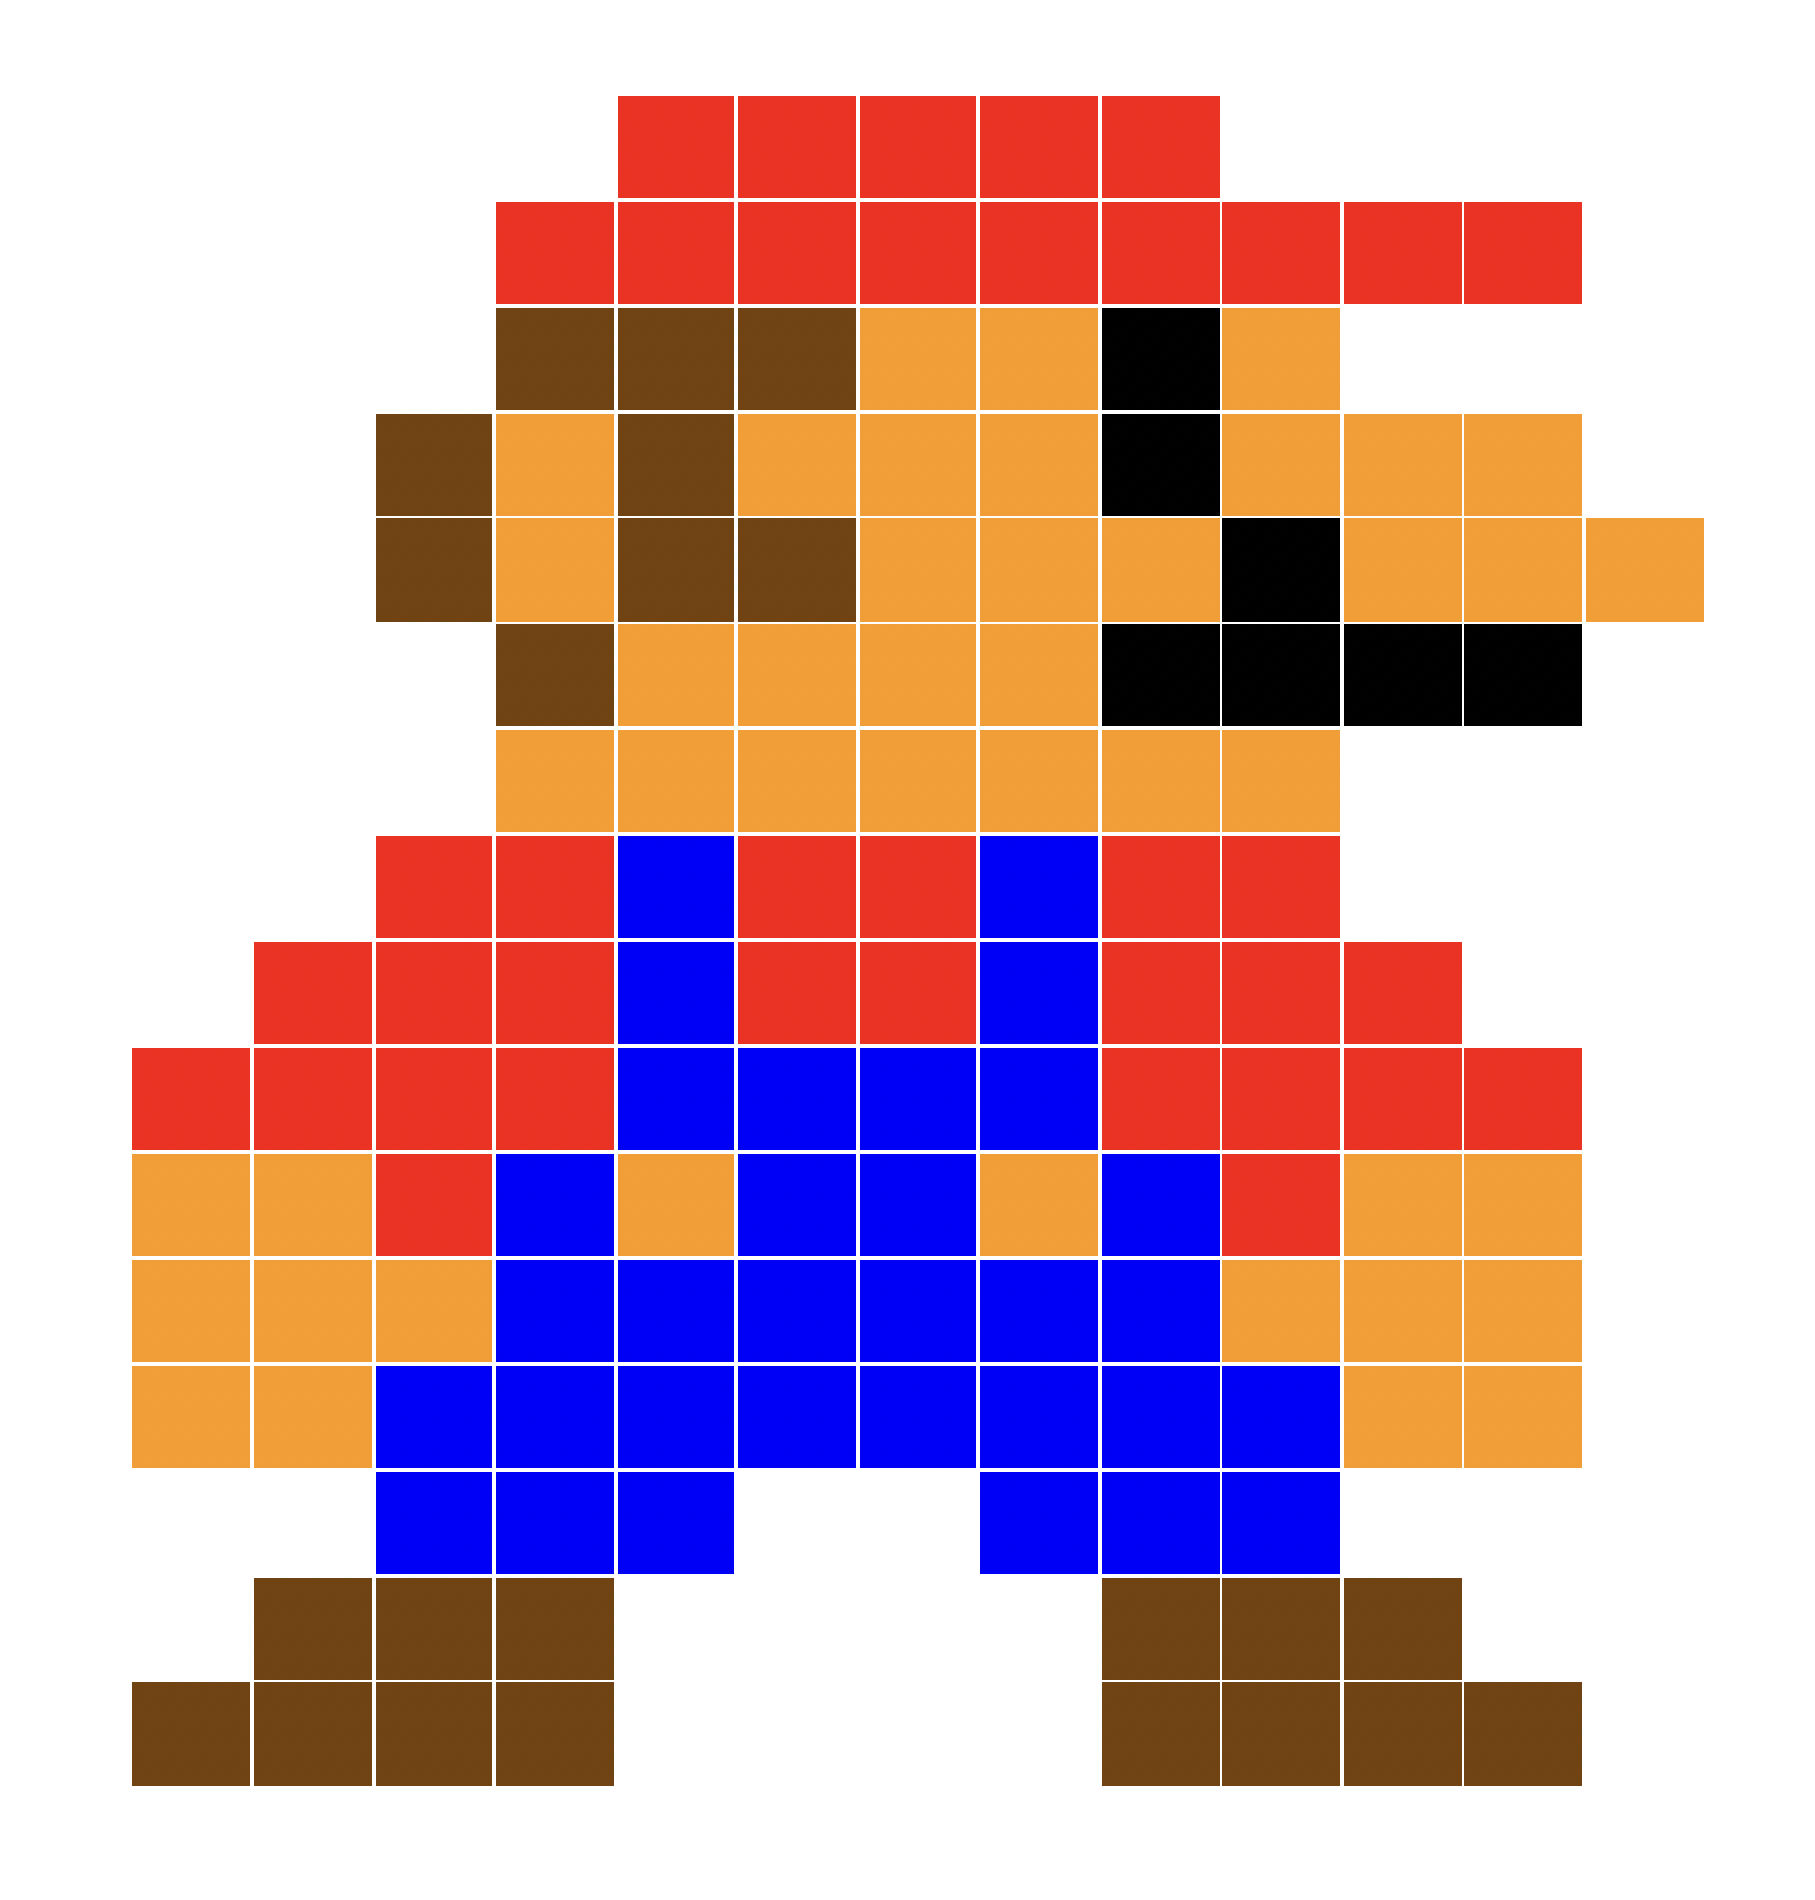 Super Mario "pixelated" image made out of Button blocks in the WordPress editor.